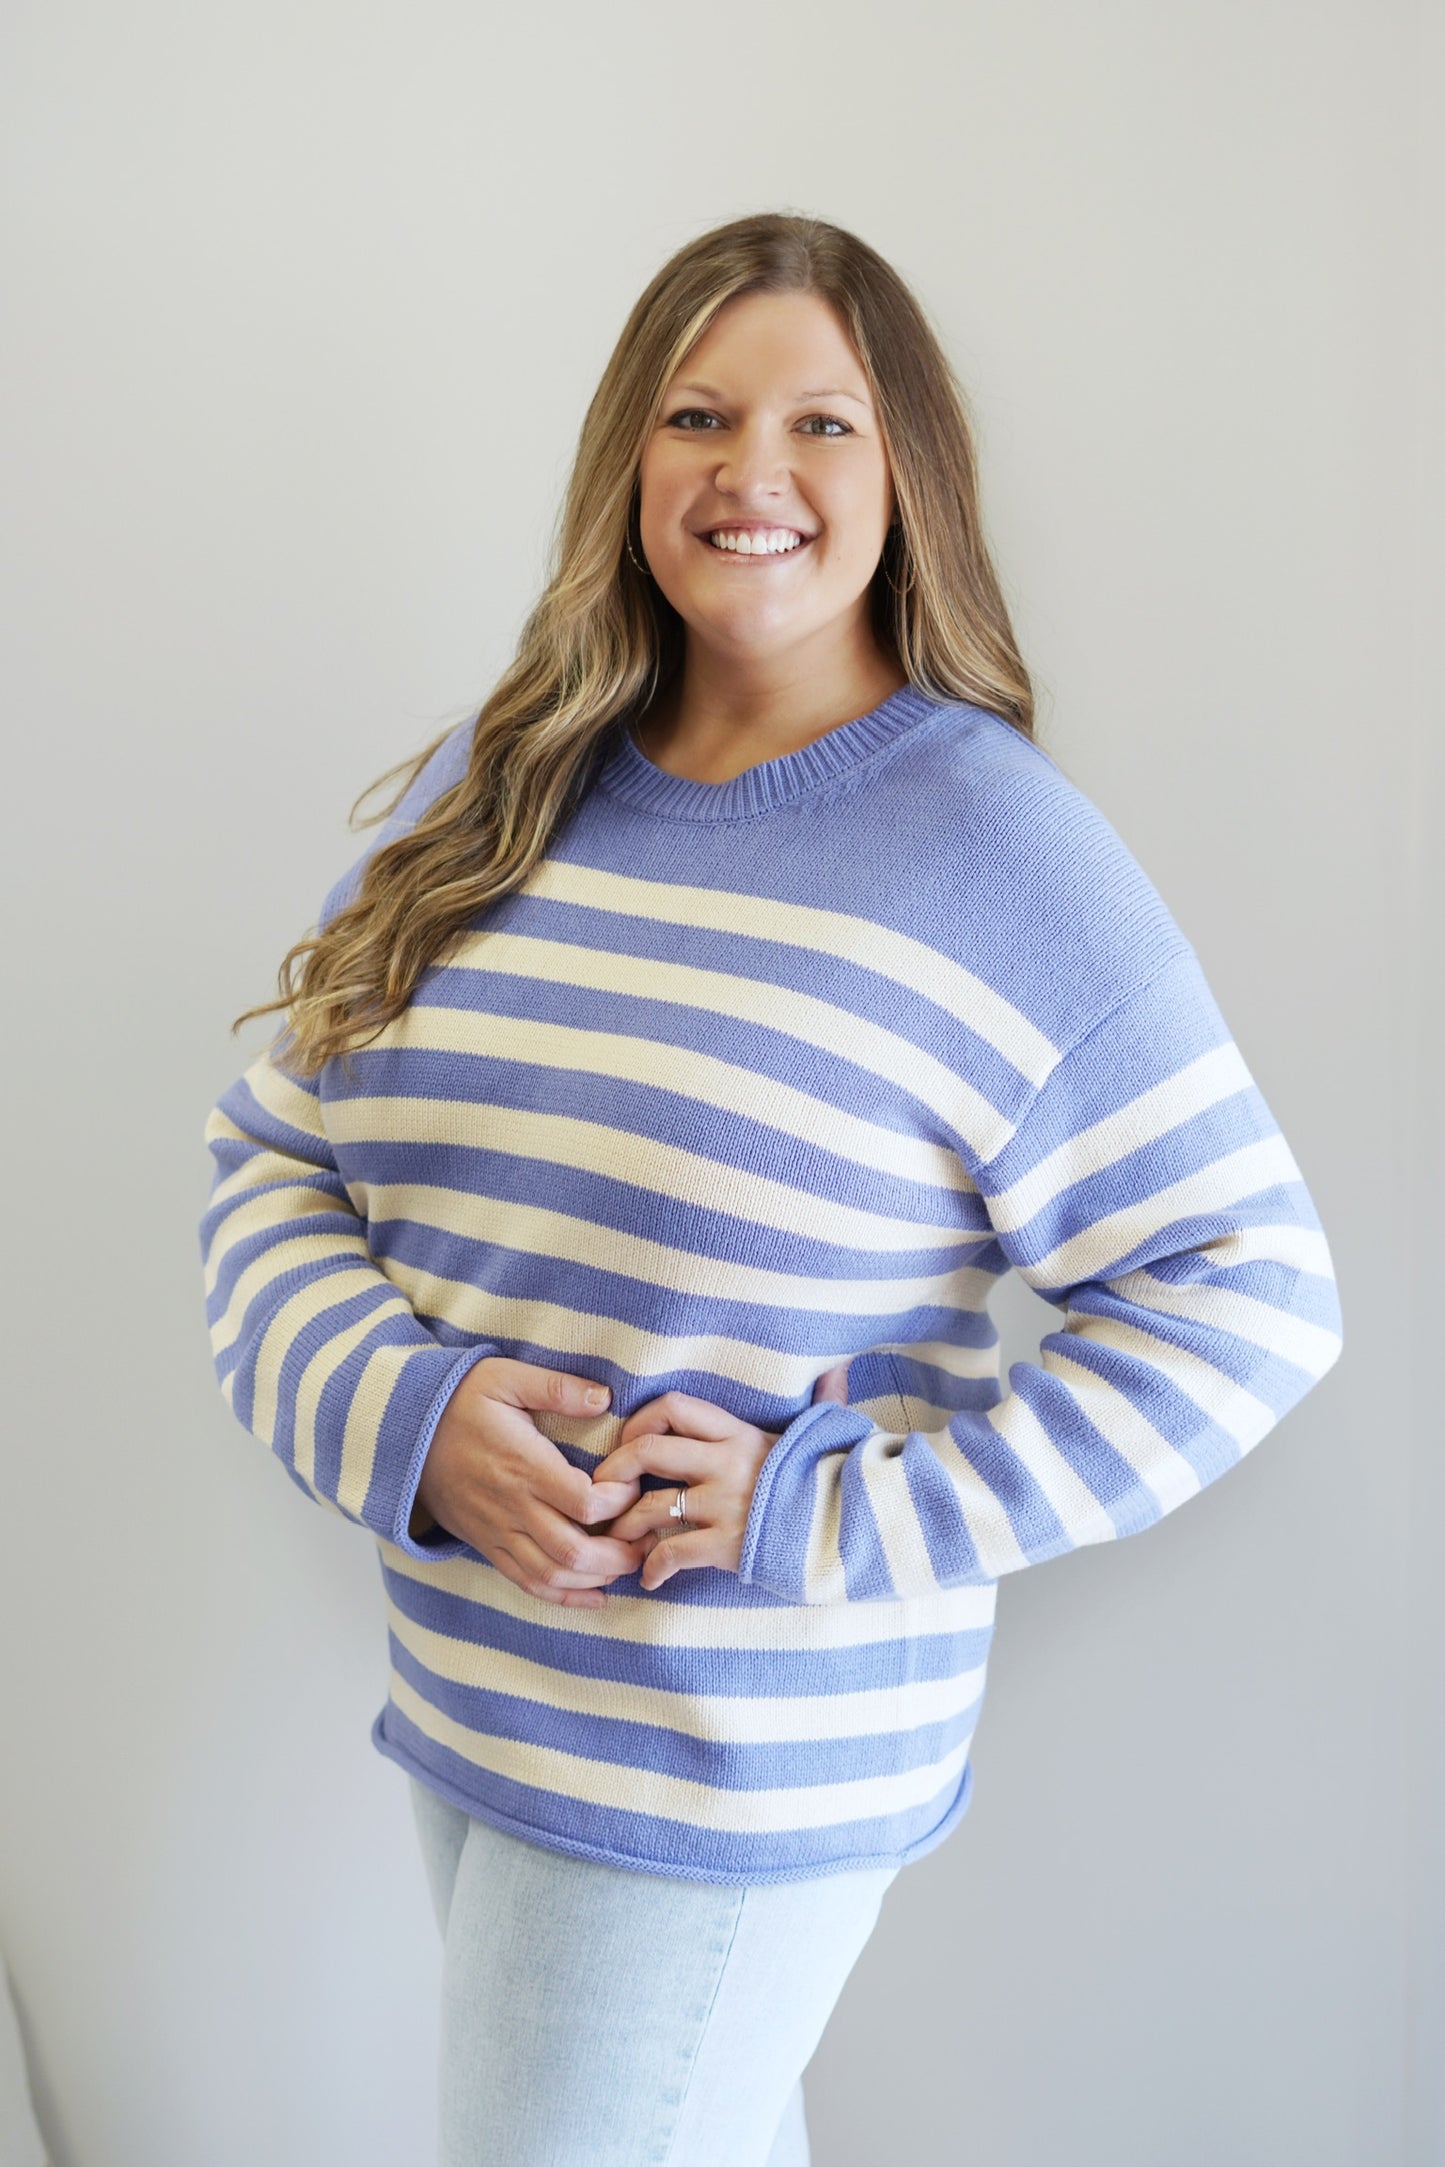 Lemmy Lush Striped Knit Sweater Round Neckline Long Bell Sleeves Irish Blue and Cream Colored Stripes Full Length Relaxed Fit 60% Cotton, 40% Acrylic